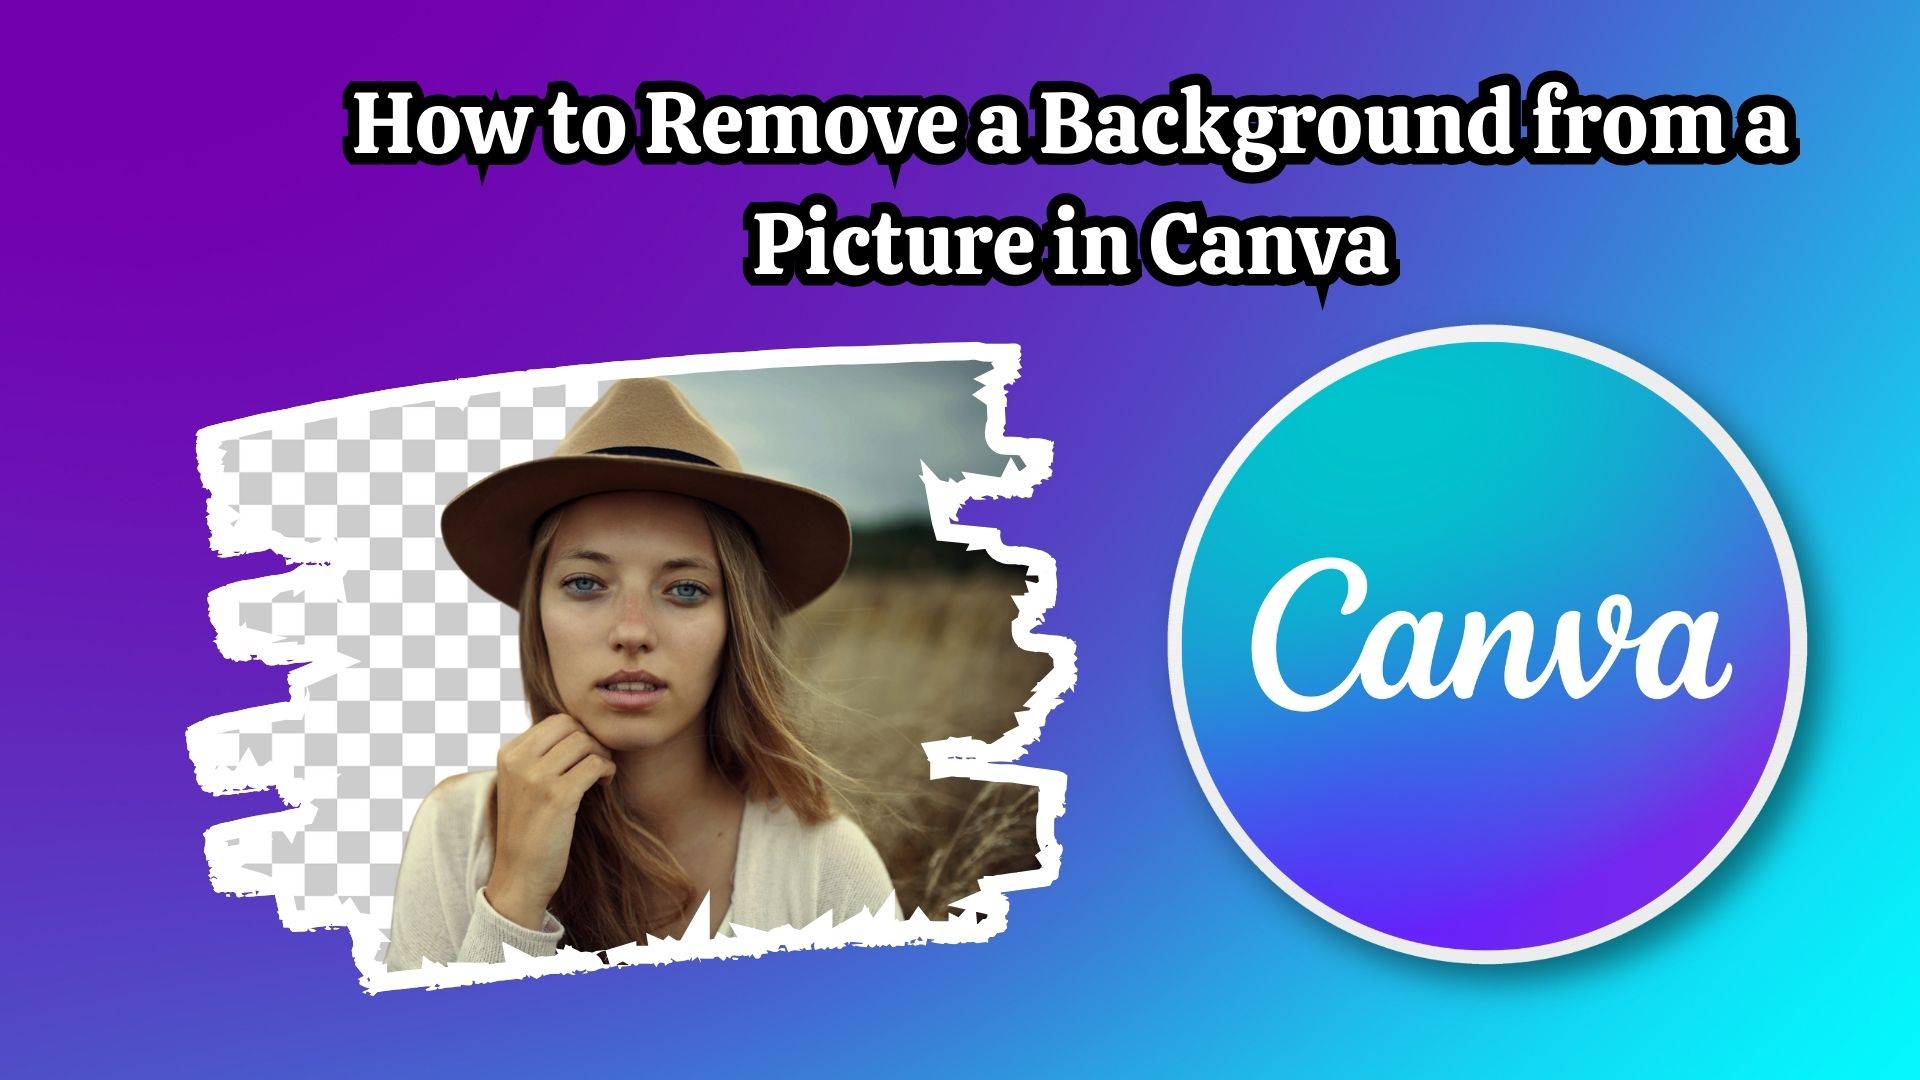 How to Remove a Background from a Picture in Canva [Full Guide]